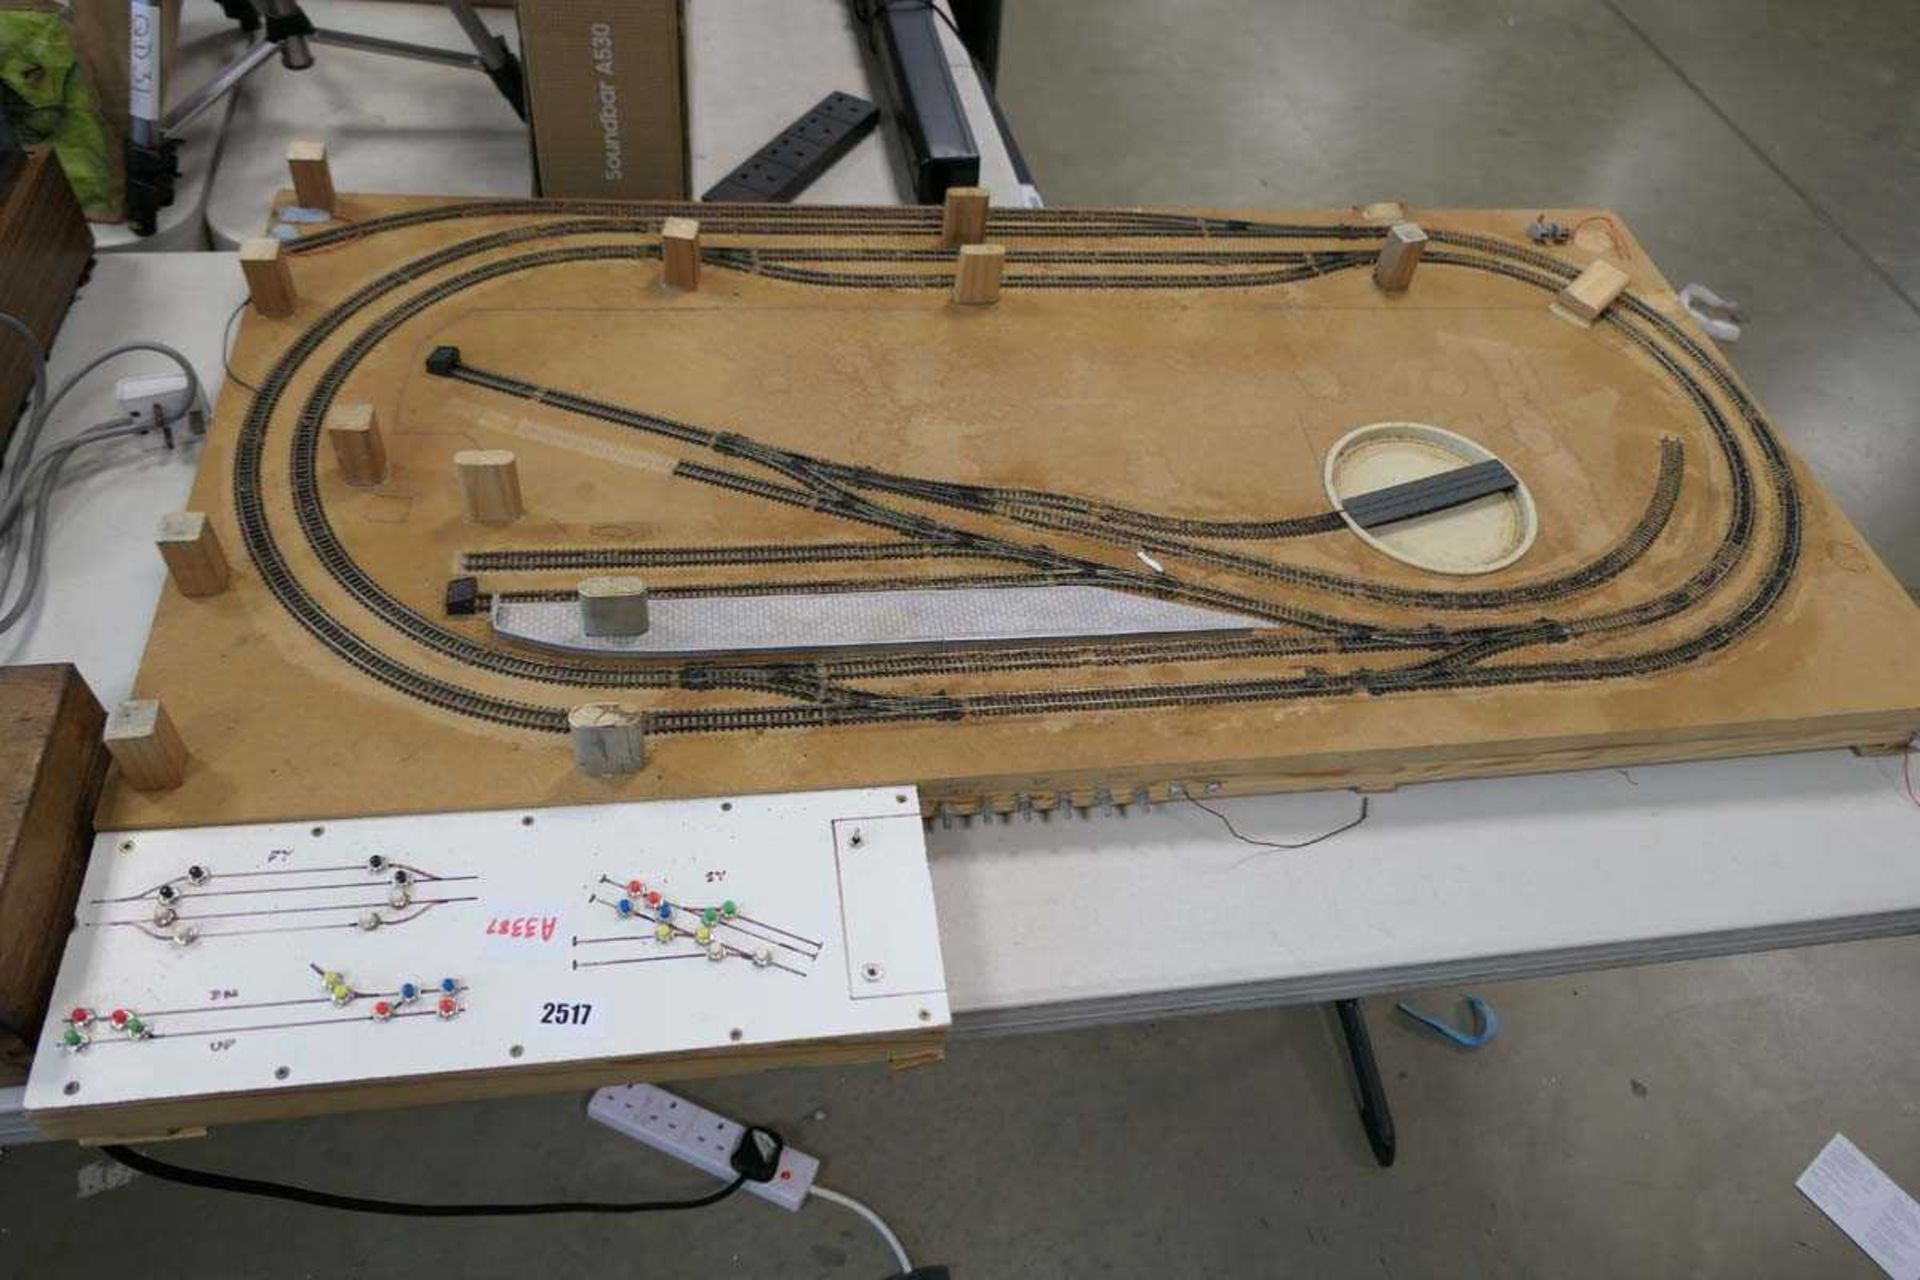 N-guage layout track set with turntable and electrical points